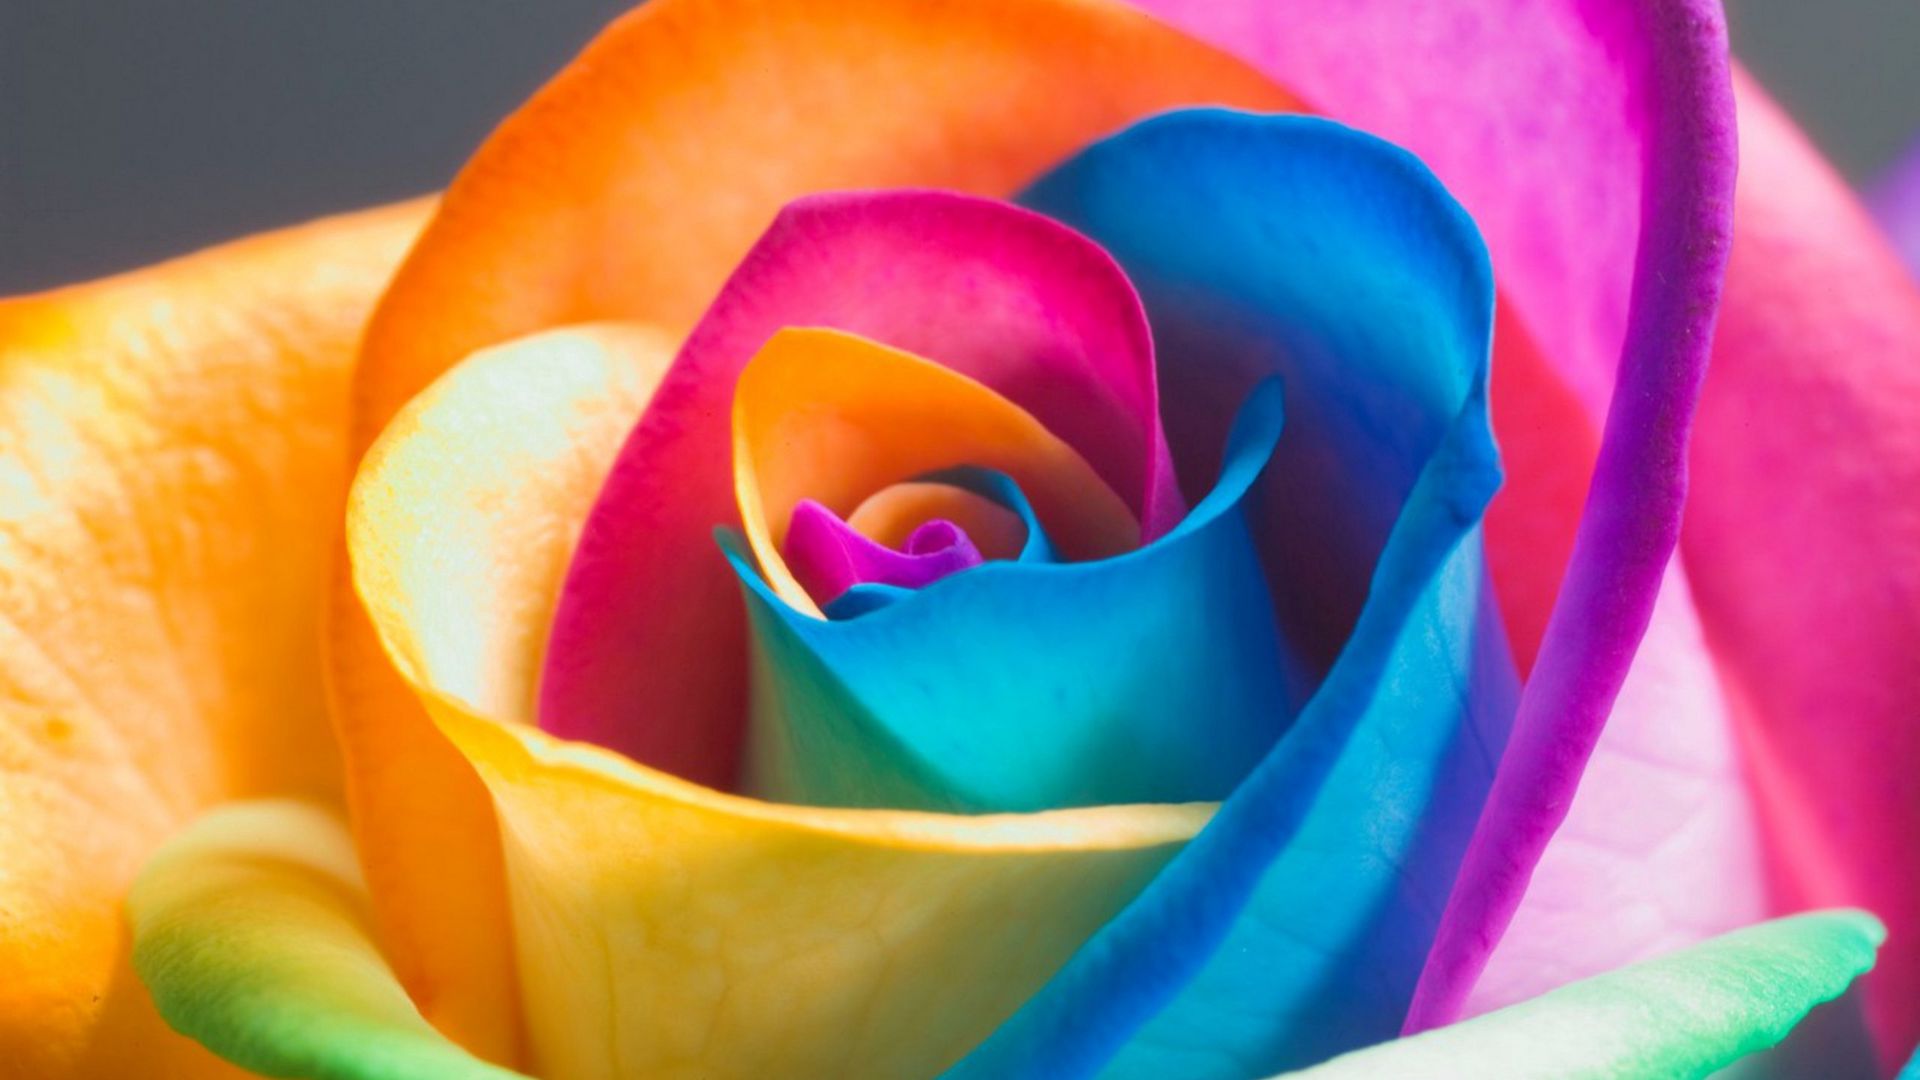 Download wallpaper 1920x1080 rose, flower, colorful, close-up, petals full  hd, hdtv, fhd, 1080p hd background